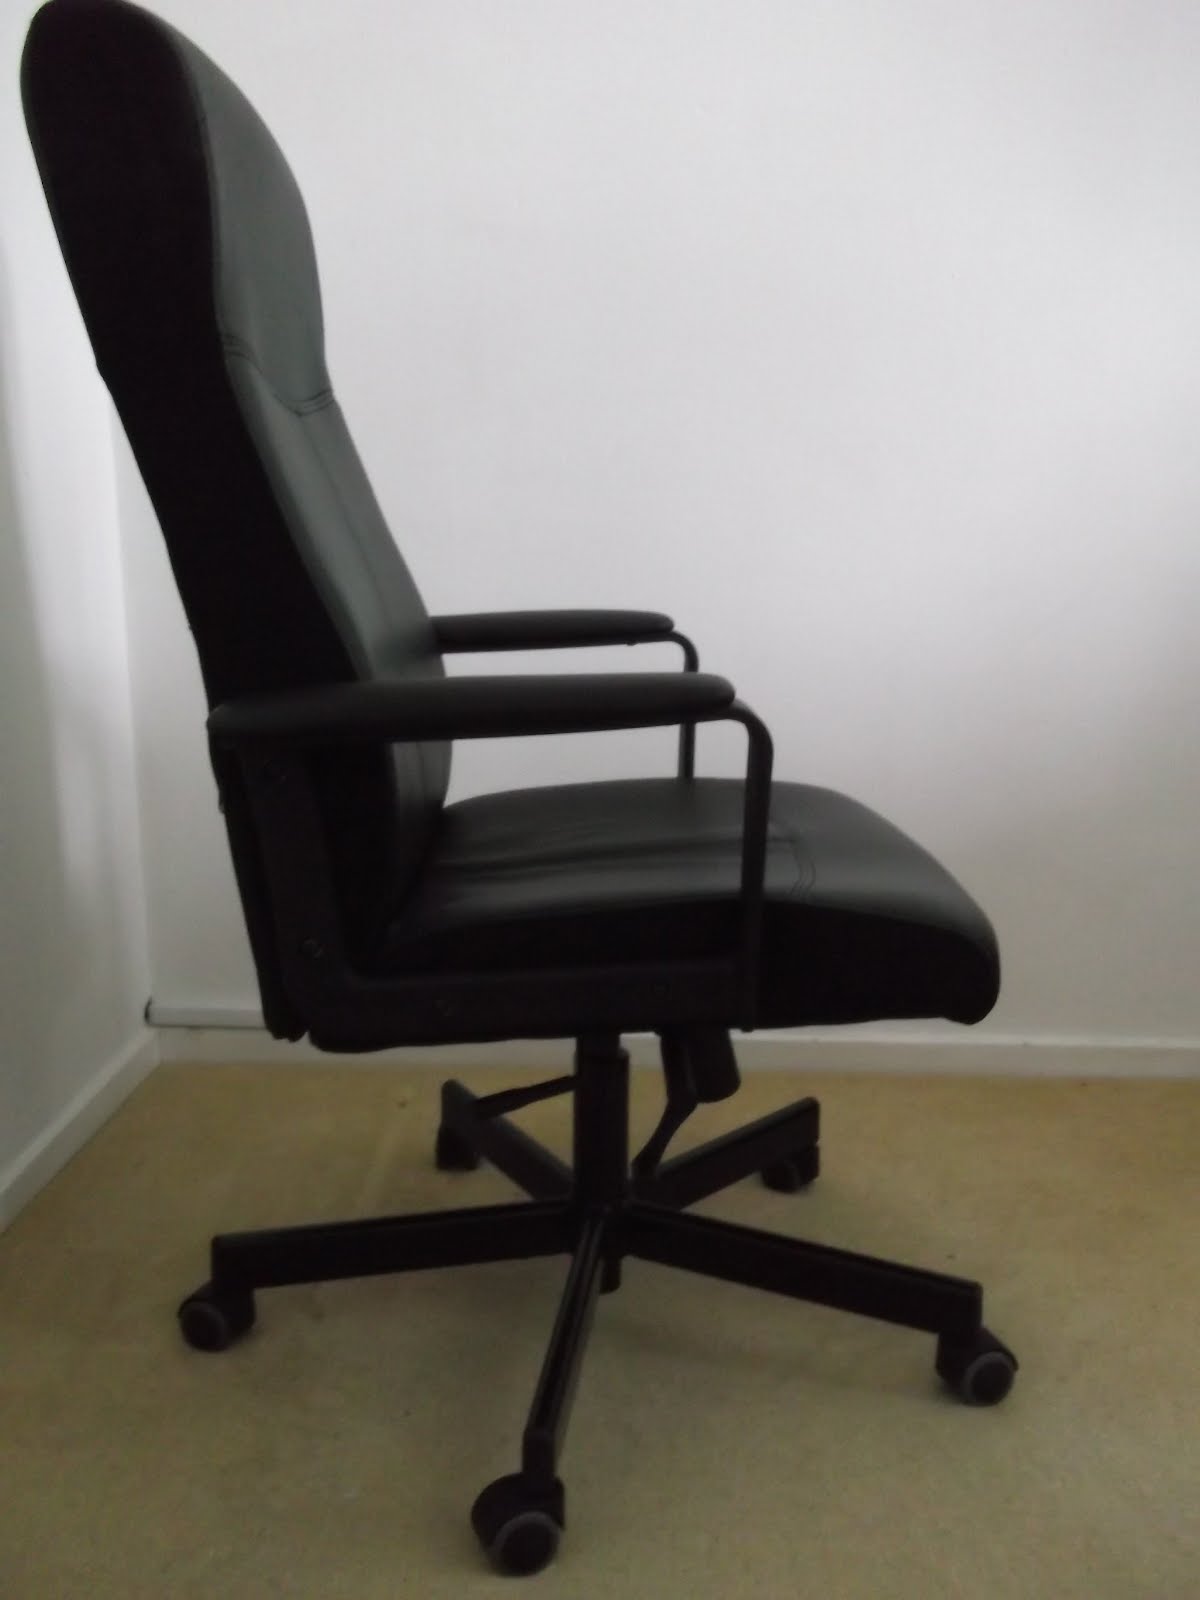 Consumer Review: IKEA office chair review : IKEA Malkolm chair